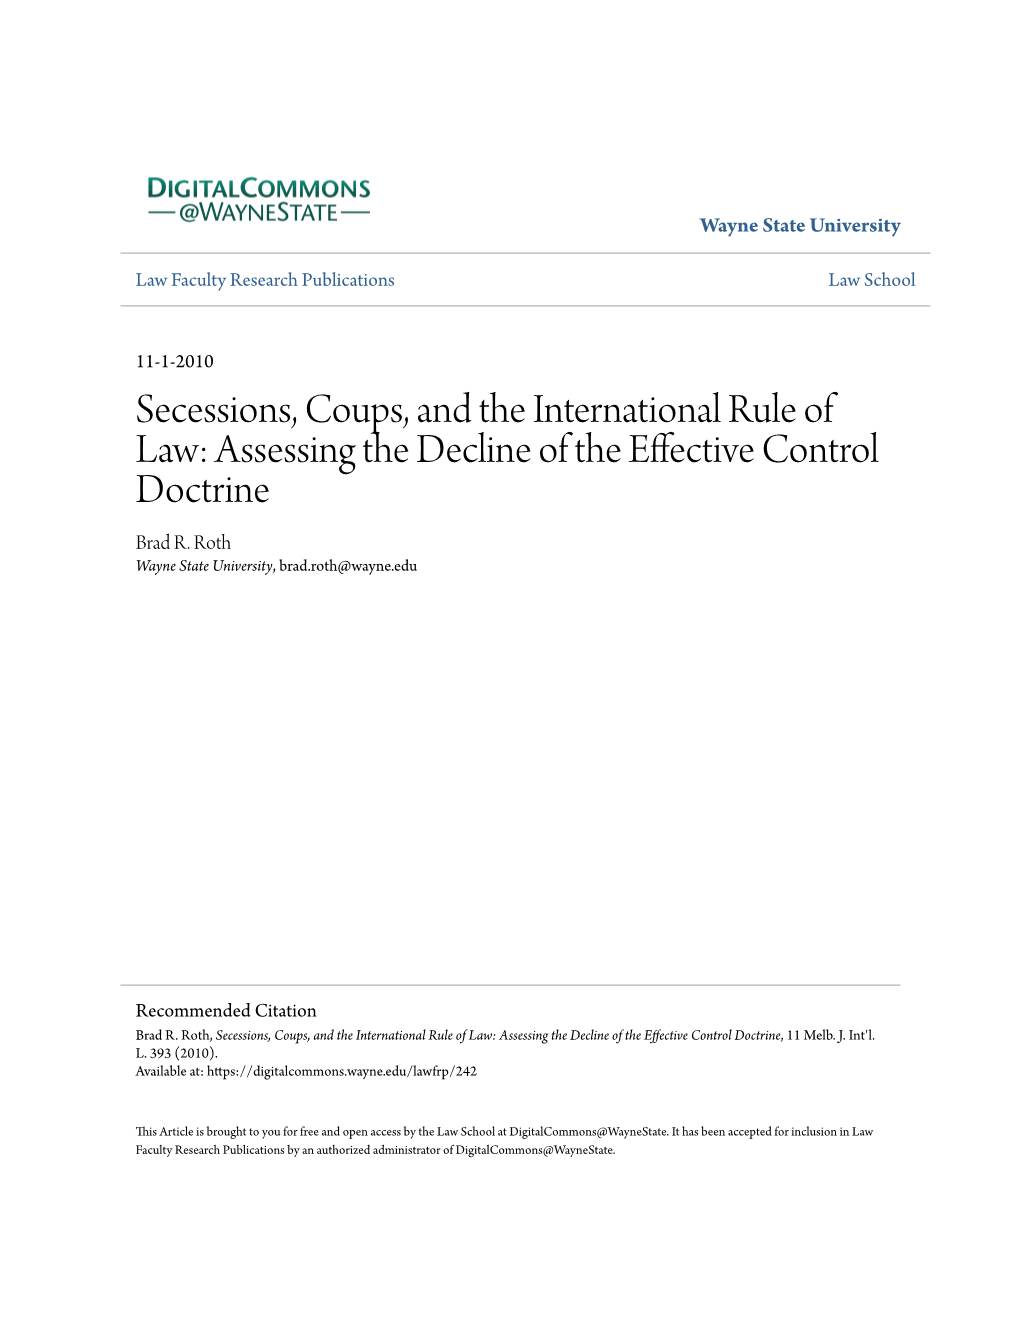 Secessions, Coups, and the International Rule of Law: Assessing the Decline of the Effective Control Doctrine Brad R